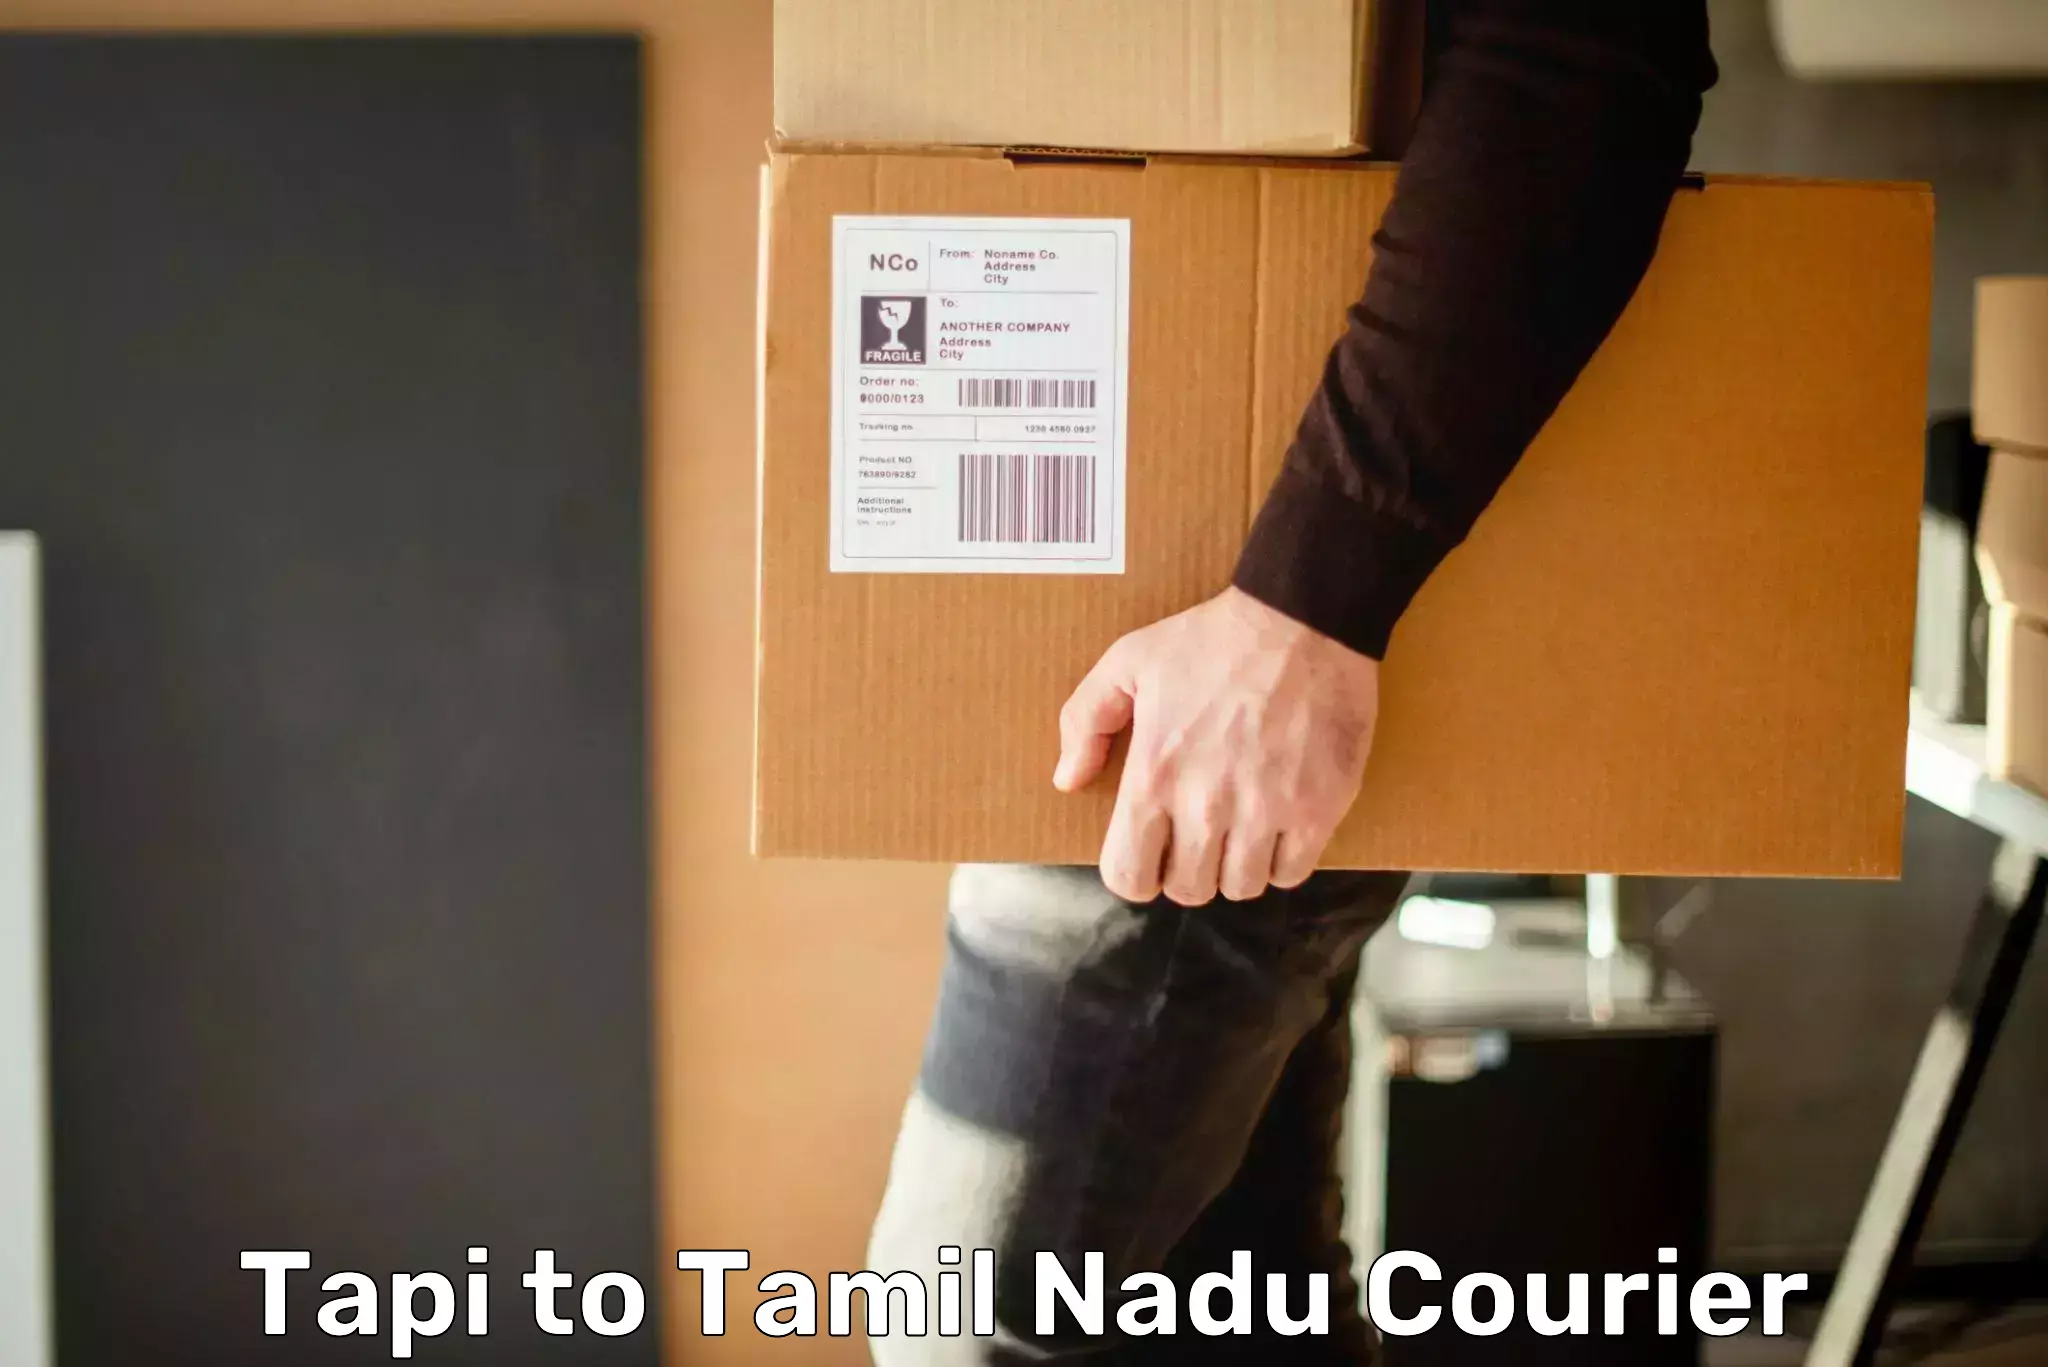 Optimized delivery routes Tapi to Tamil Nadu